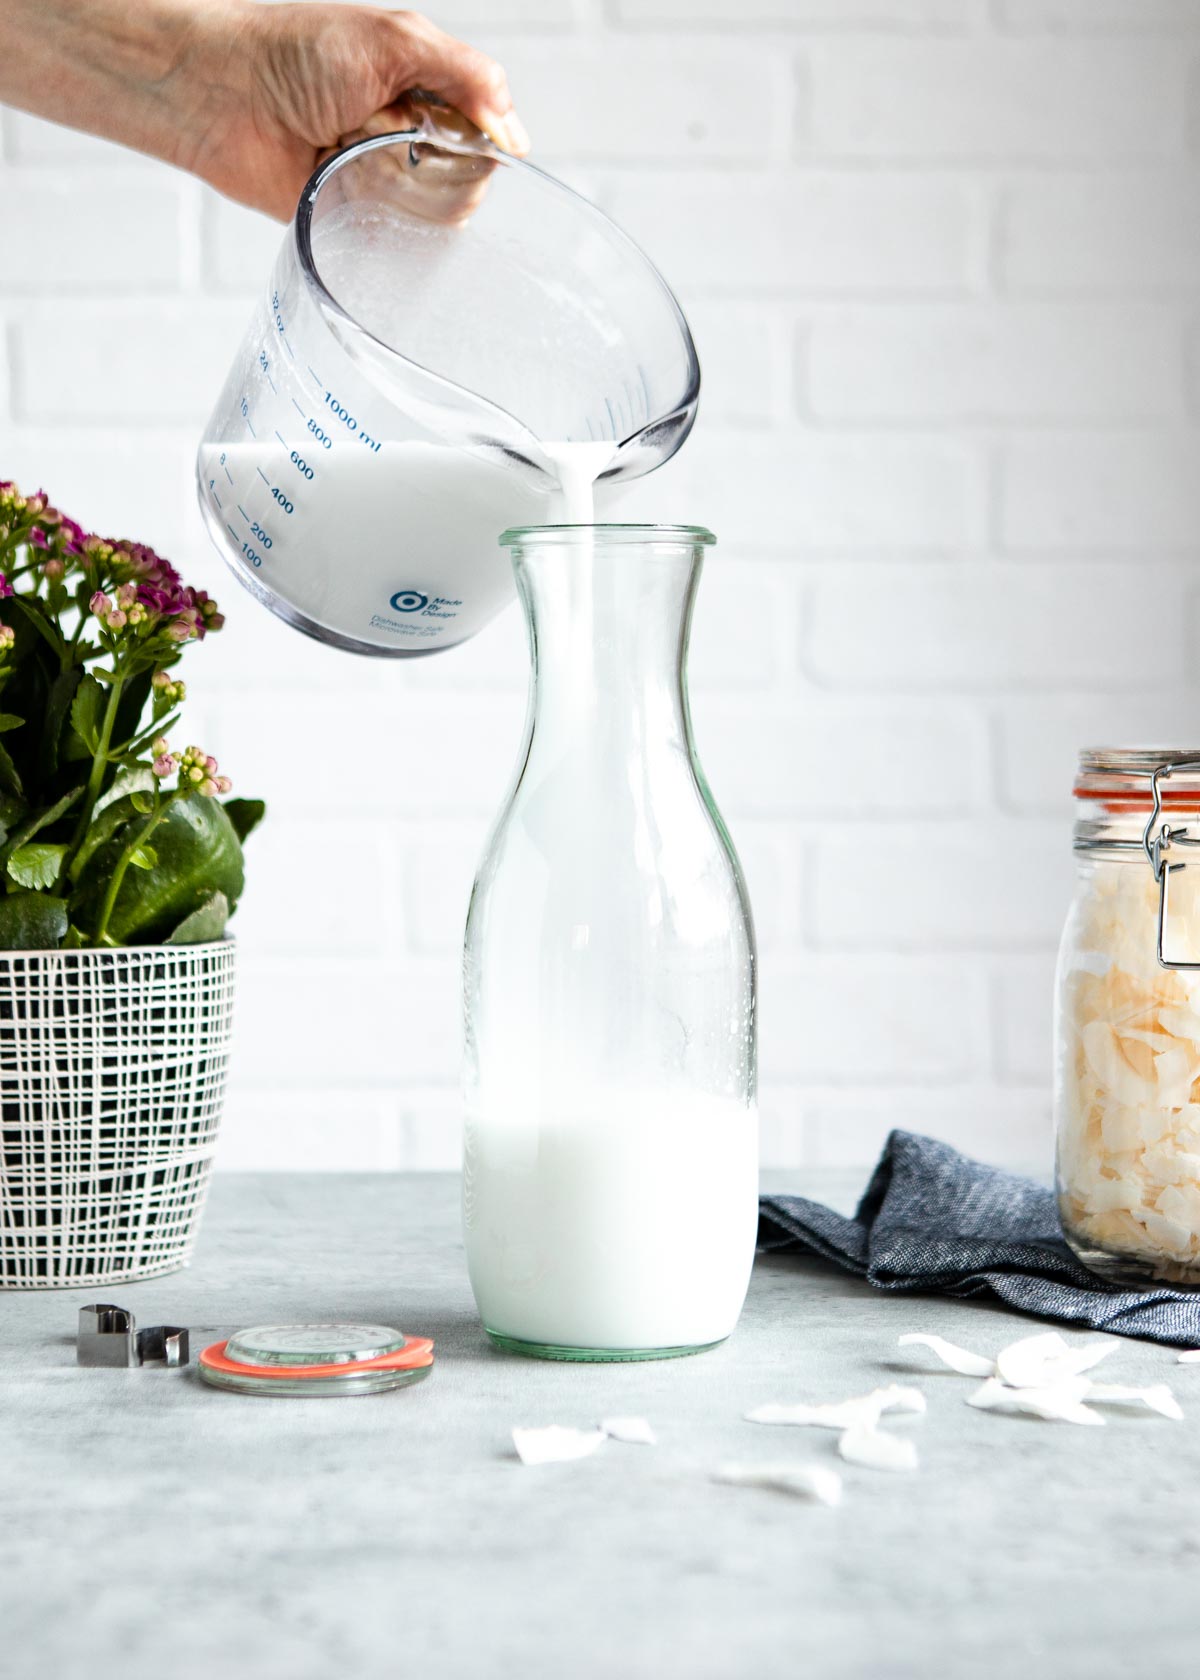 pouring coconut milk into a glass pitcher.